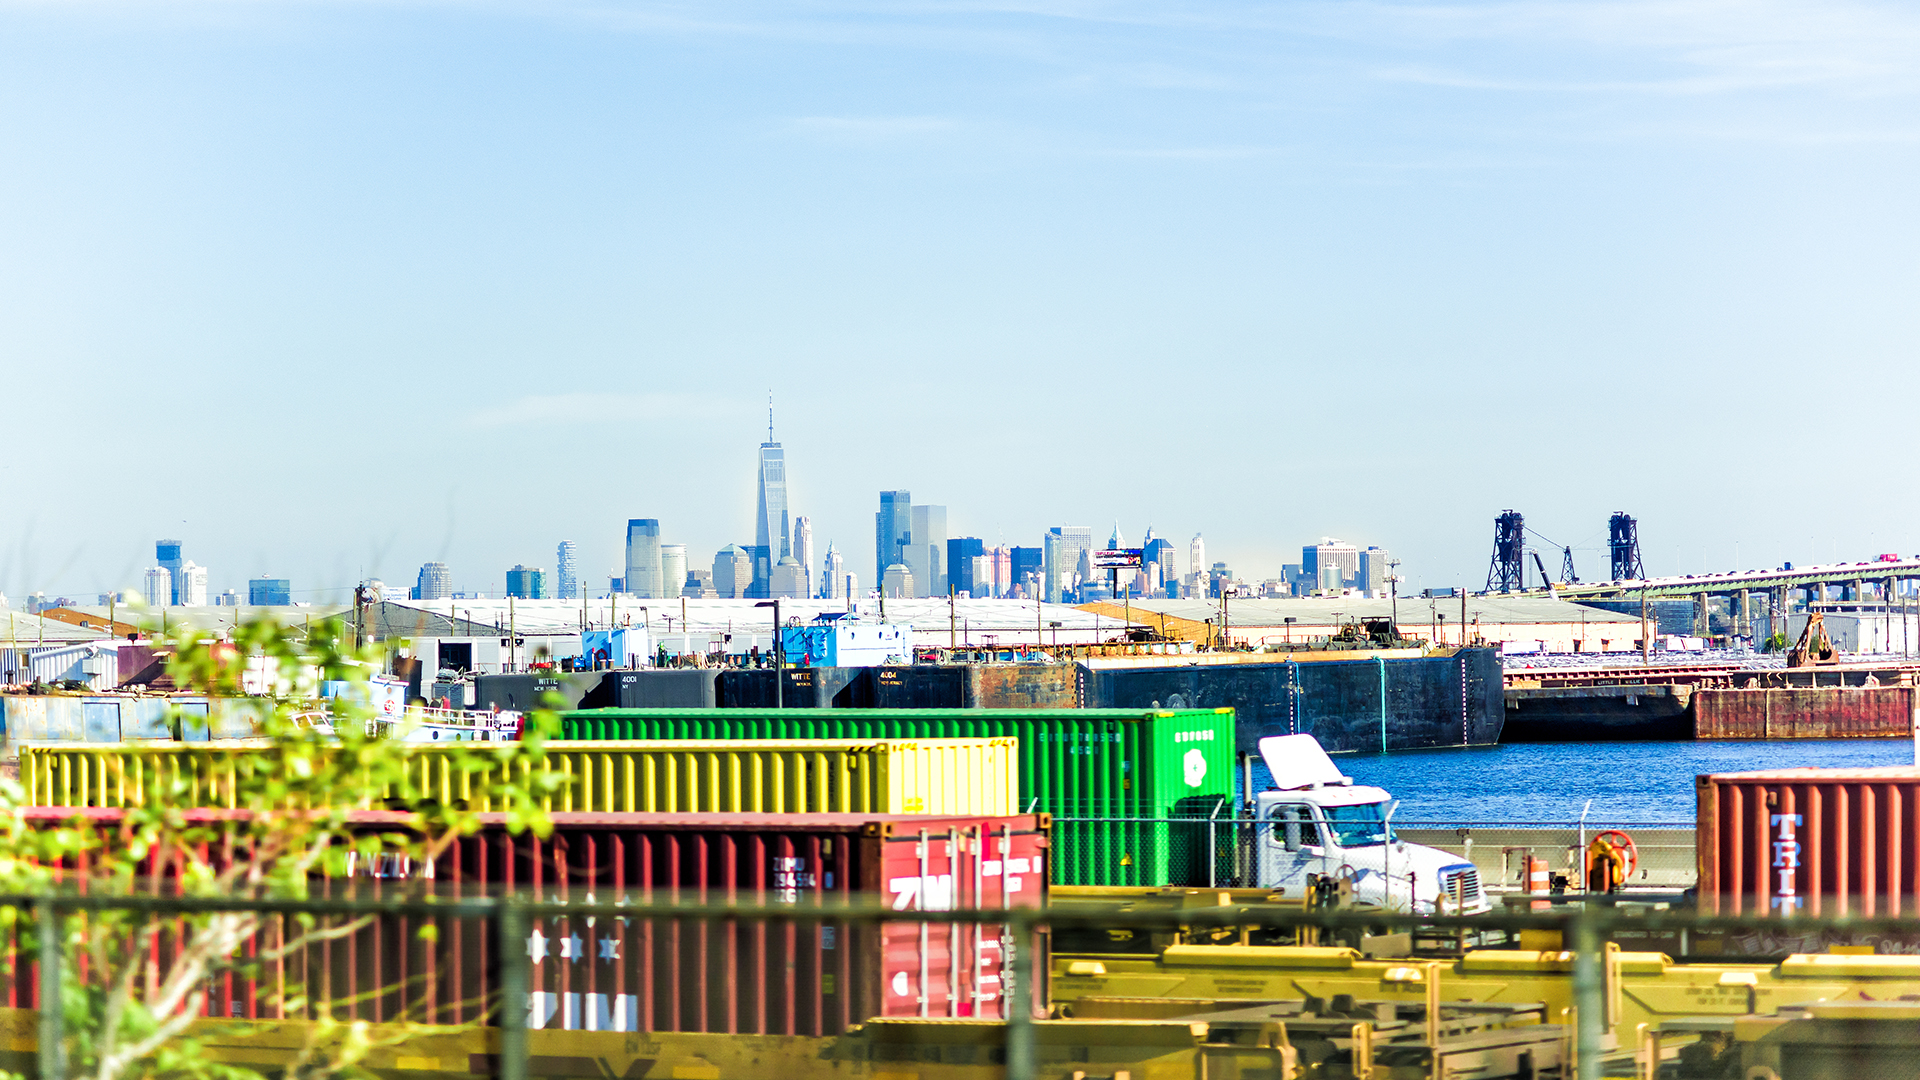 Industrial site in New Jersey with railcars, freight car management services, rail industry, port, NY skyline